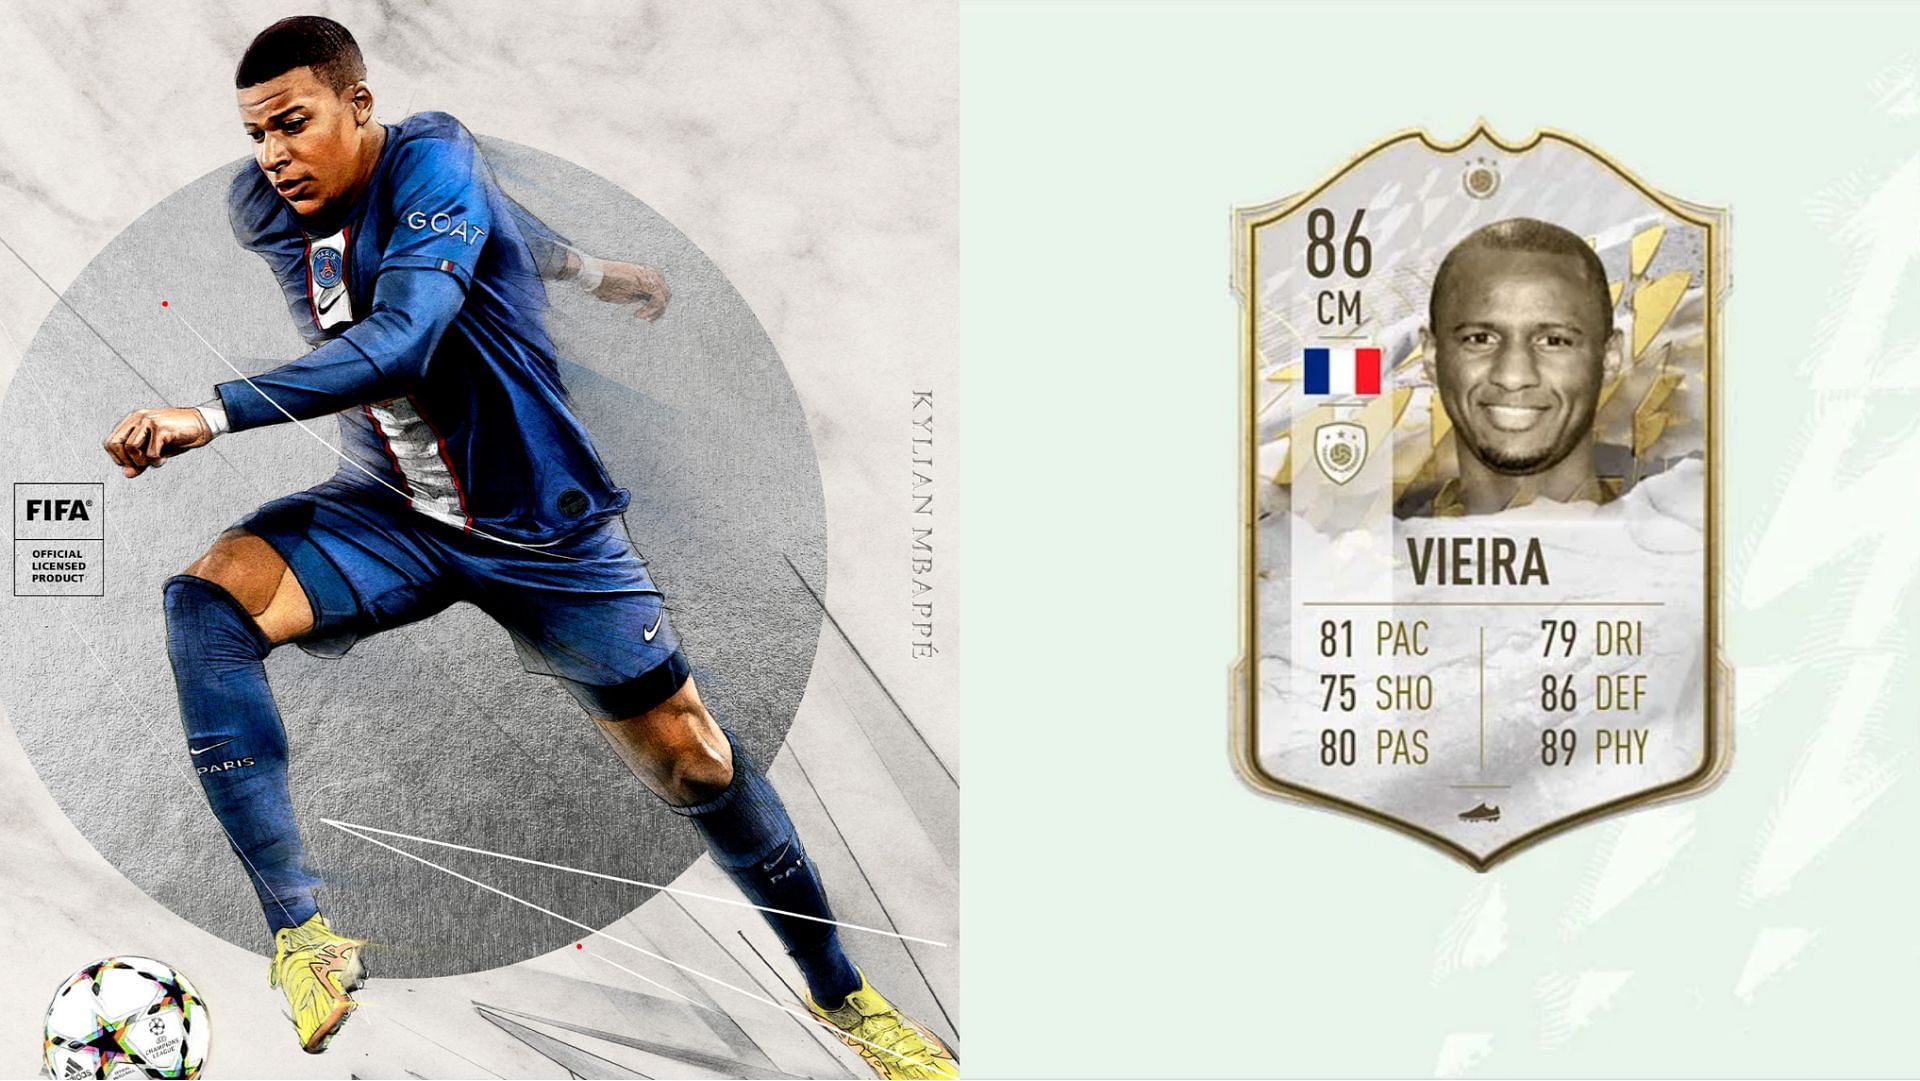 Players will soon be able to obtain special version of Ptrick Vieira